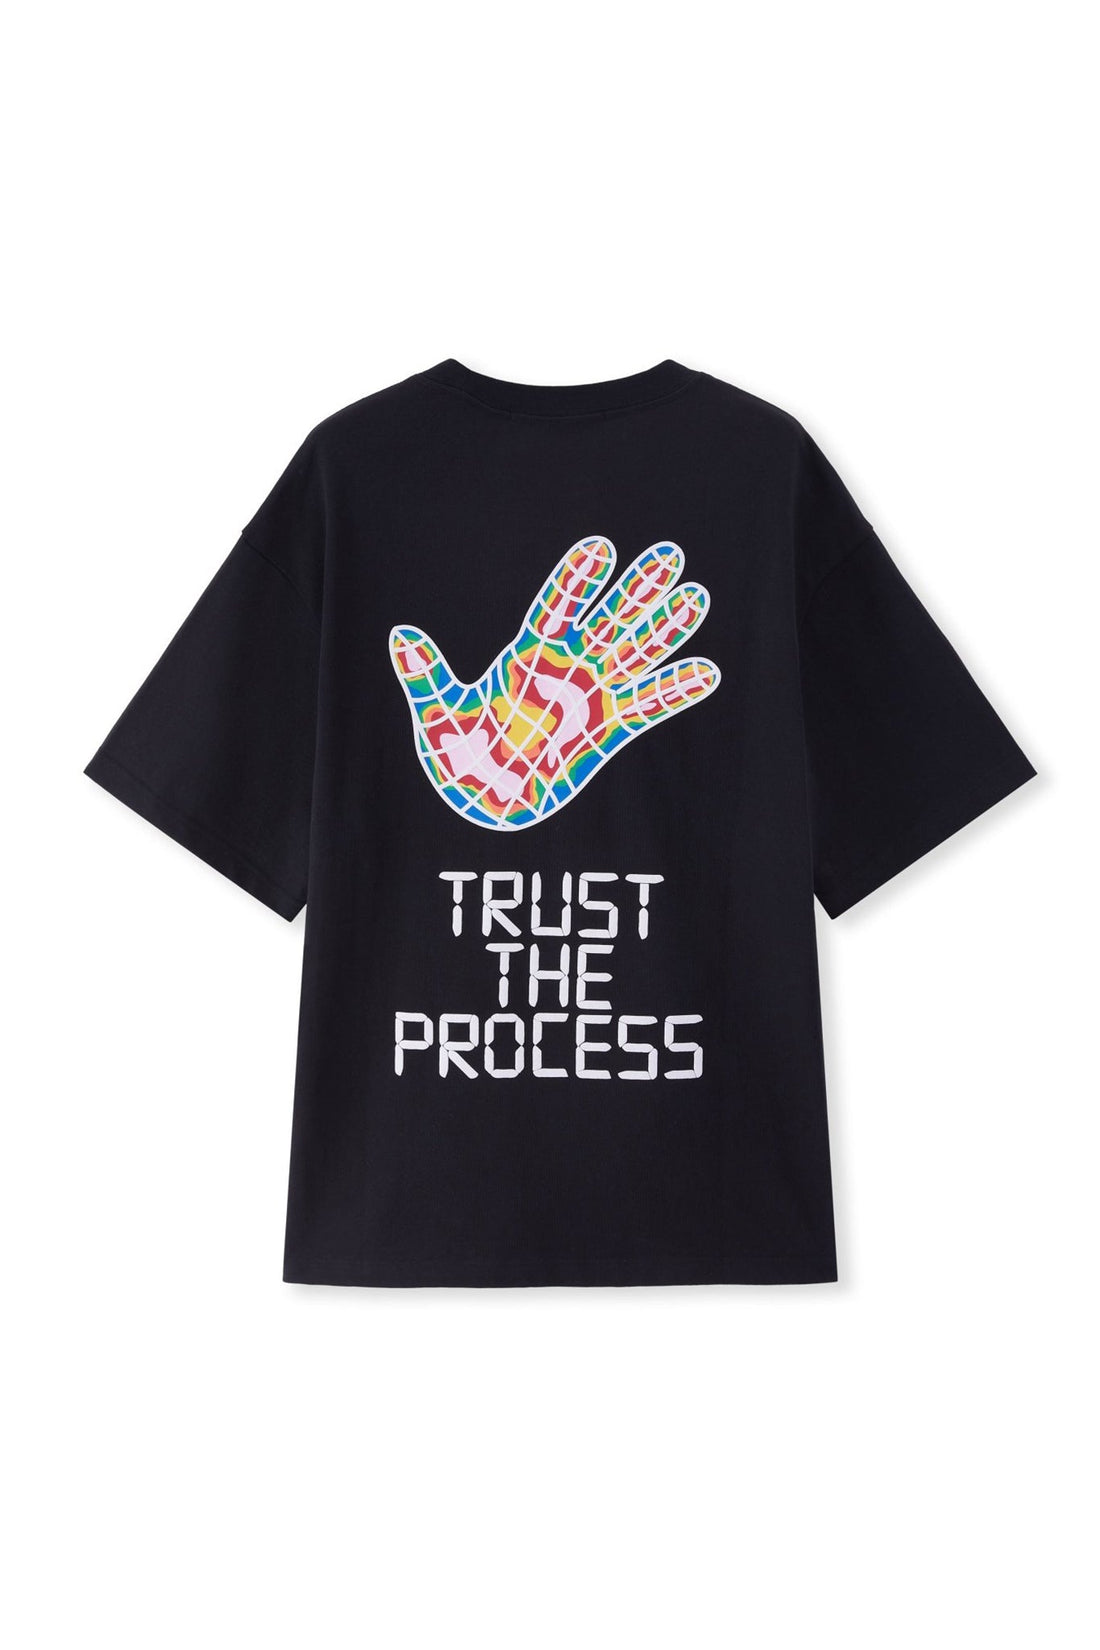 TRUST THE PROCESS T-SHIRT BLACK Acupuncture